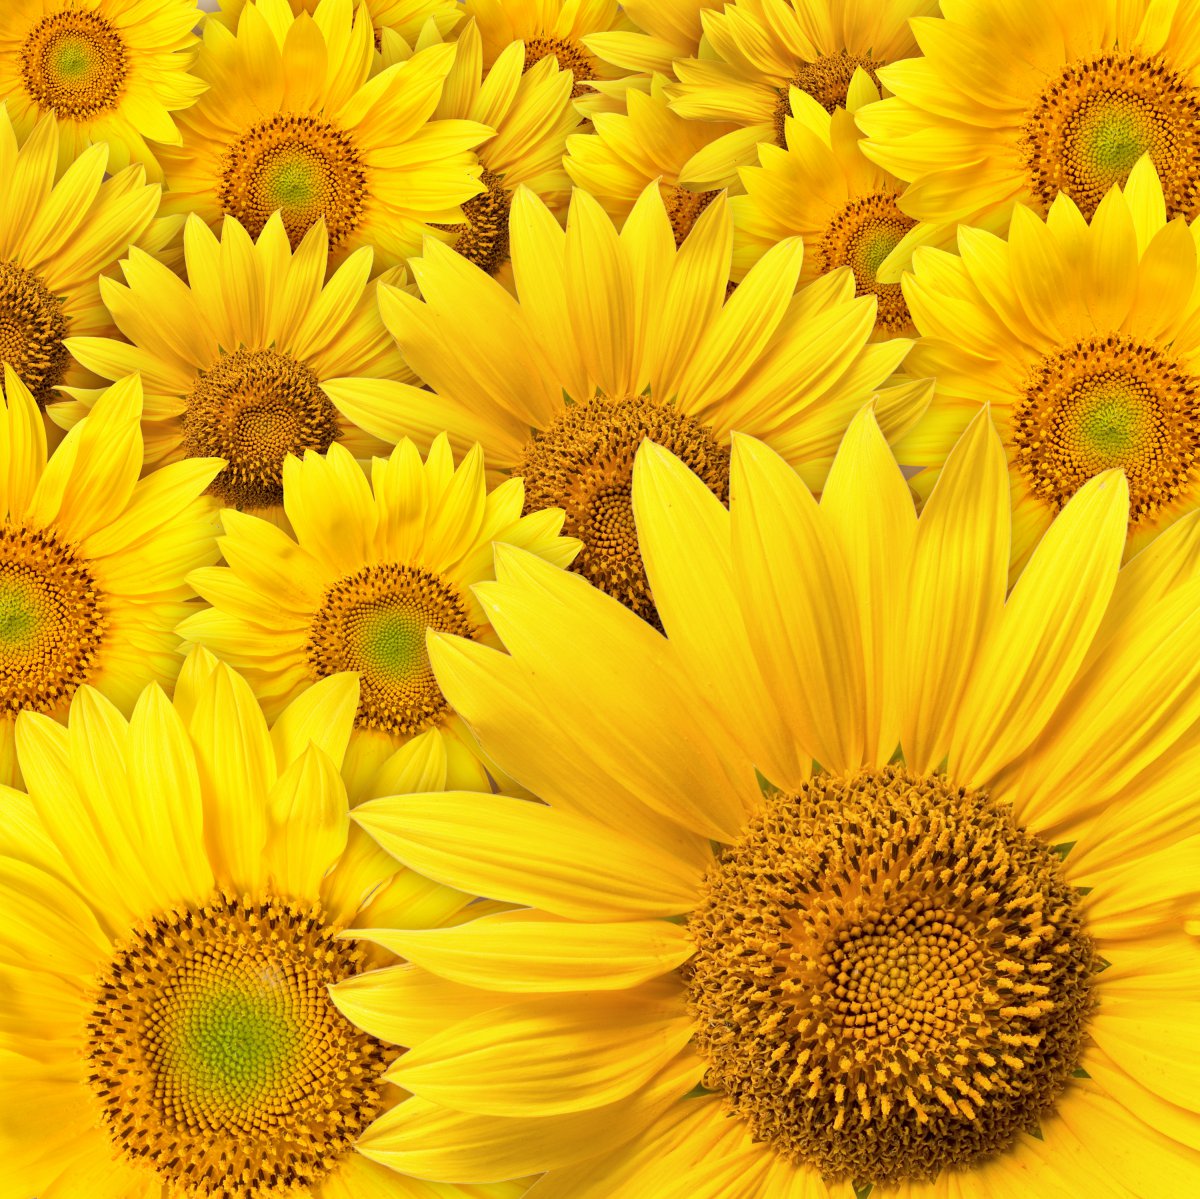 Beautiful sunflower picture large picture